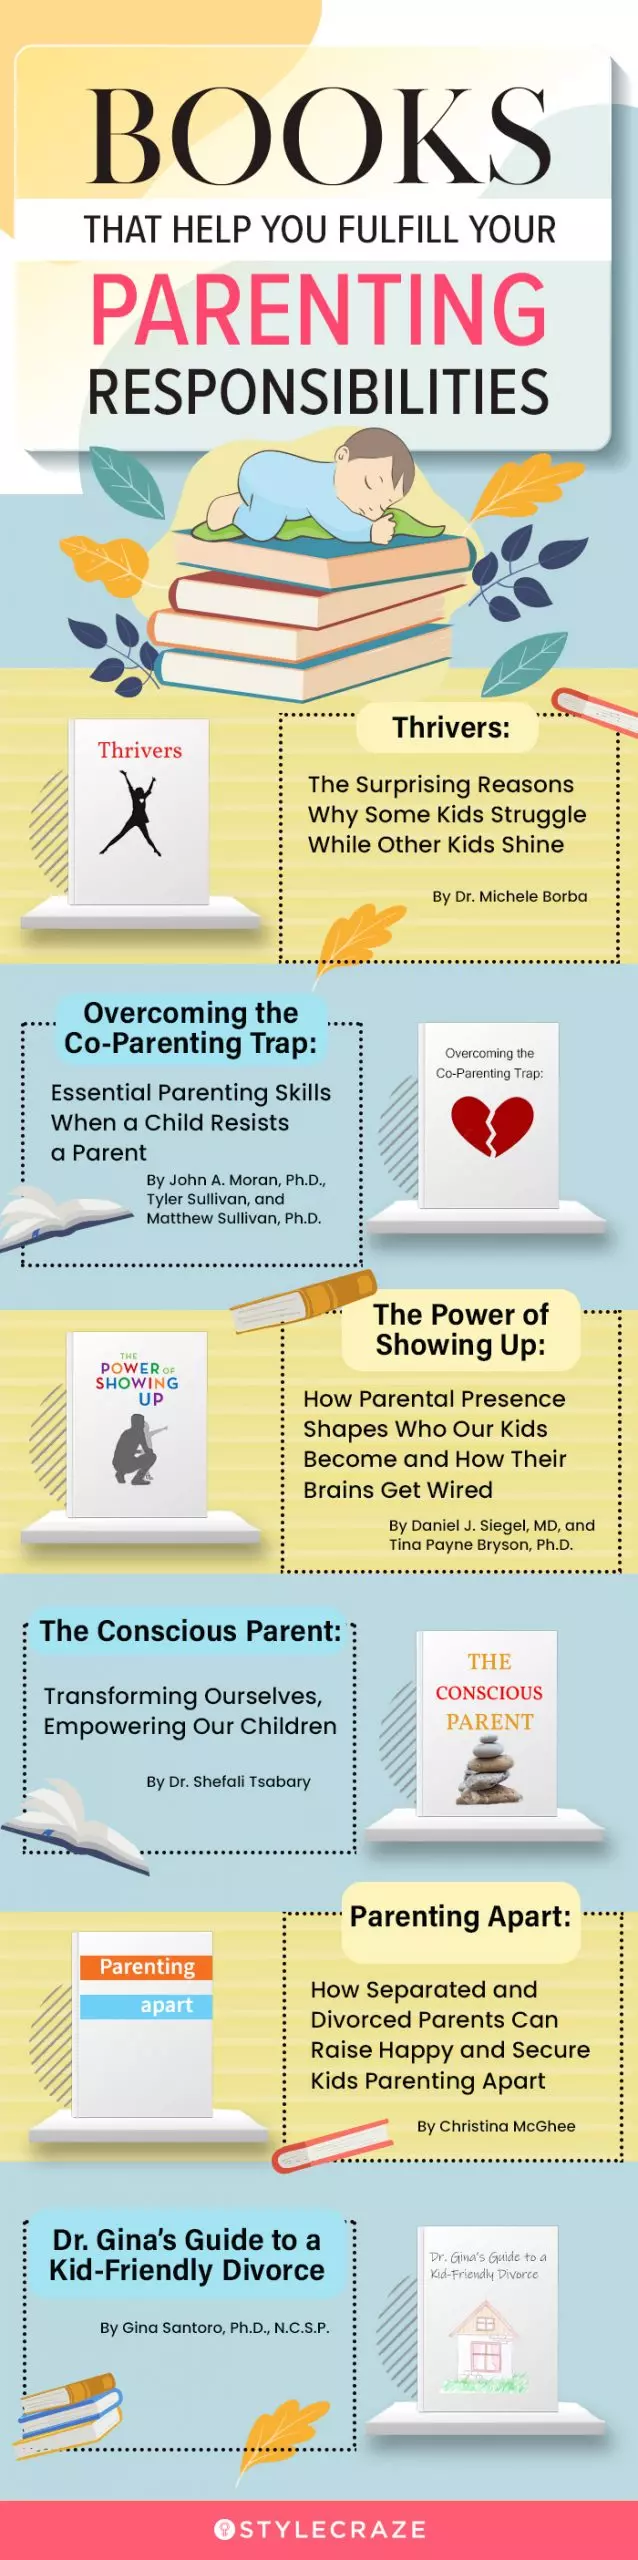 books that help you fulfill your parenting responsibilities (infographic)